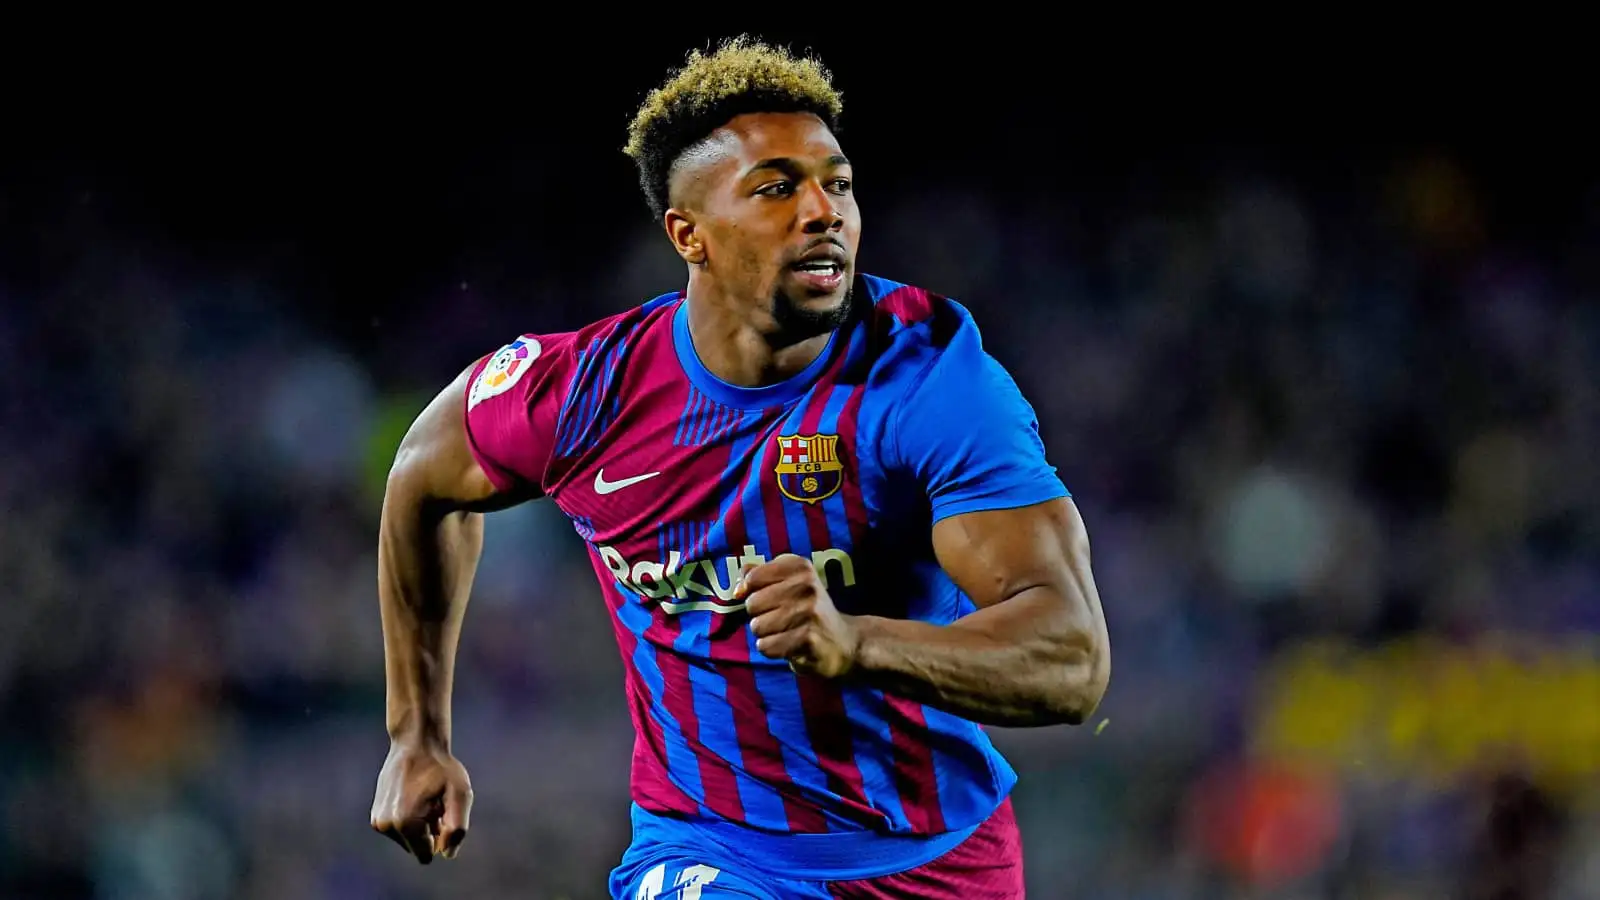 Wolves winger Adama Traore on loan with Barcelona